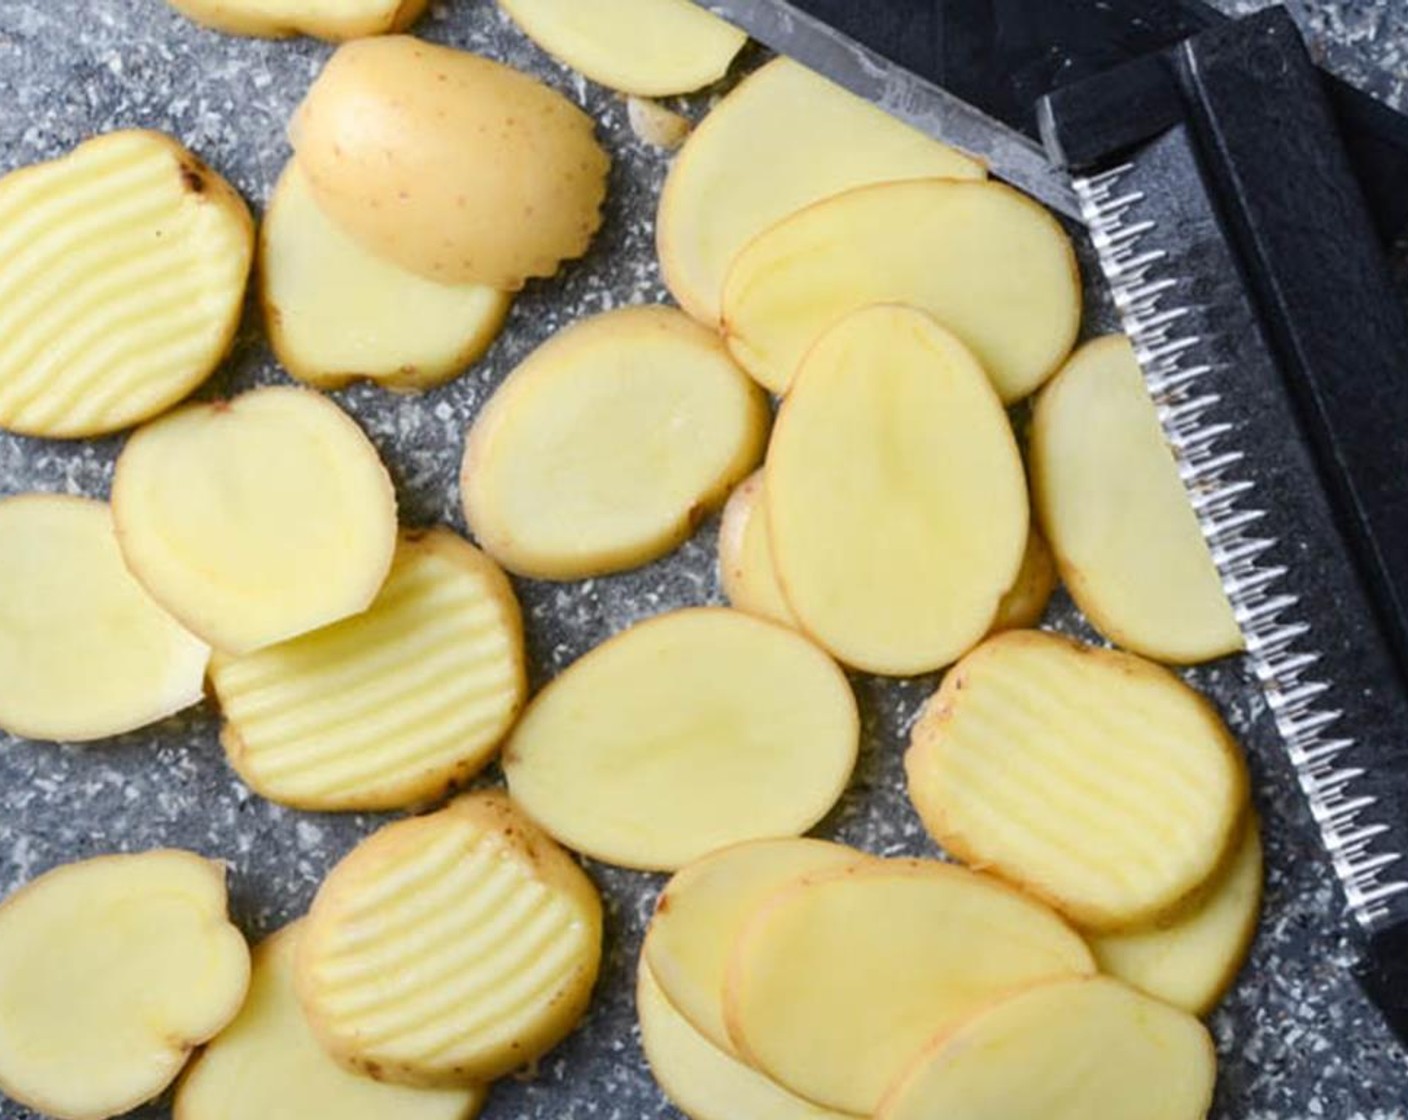 step 2 Using a sharp knife or mandoline, slice the Baby Dutch Potatoes (6) into 1/4-inch slices.